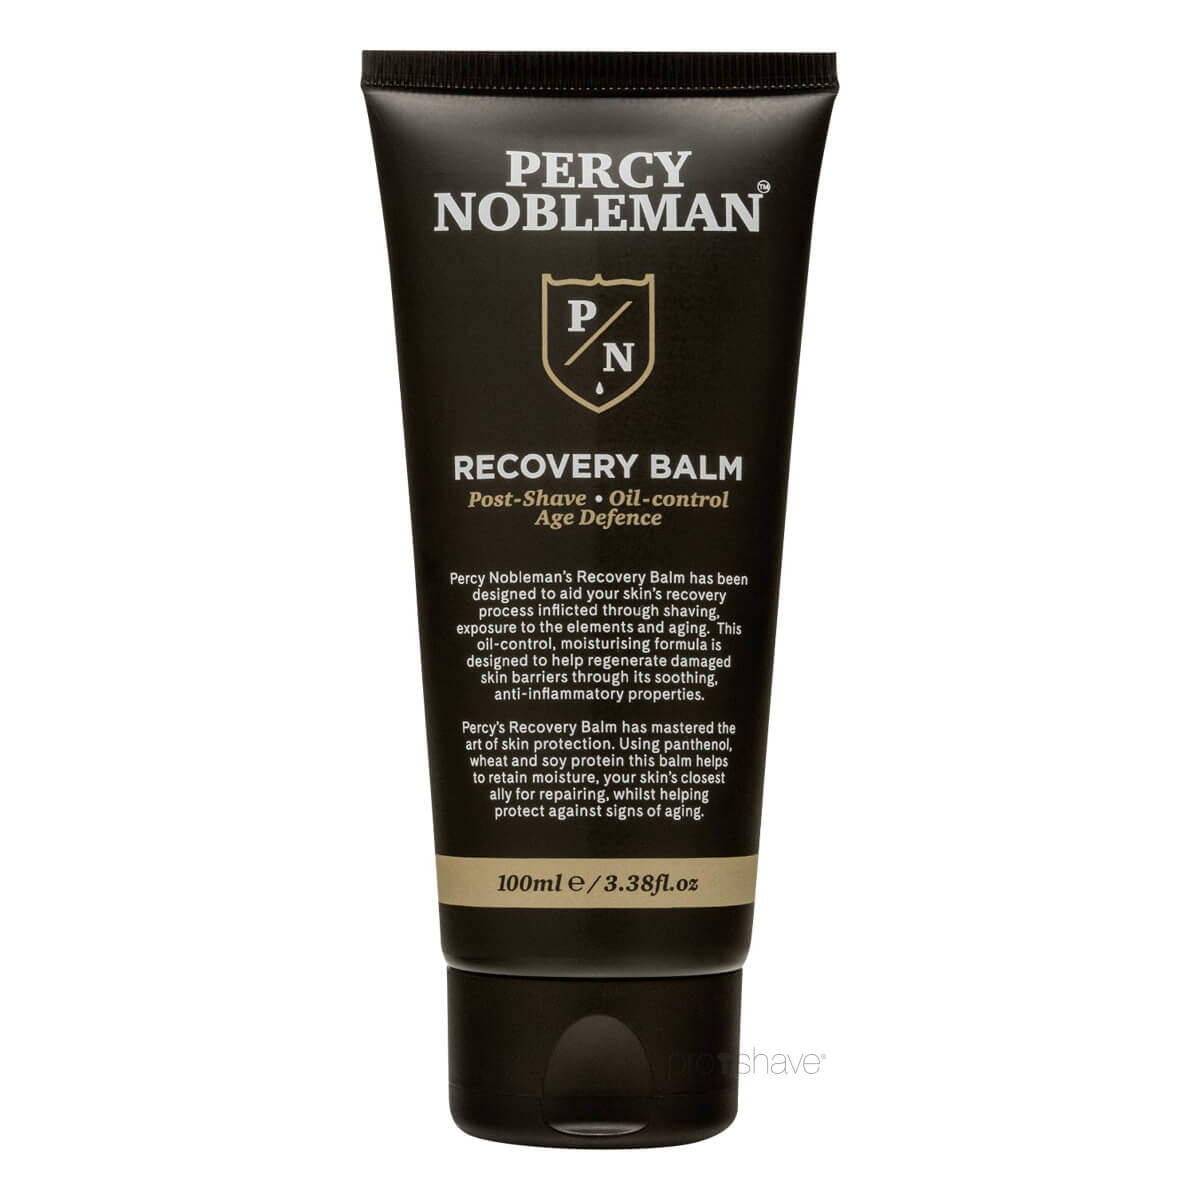 Billede af Percy Nobleman Recovery Balm, 100 ml.